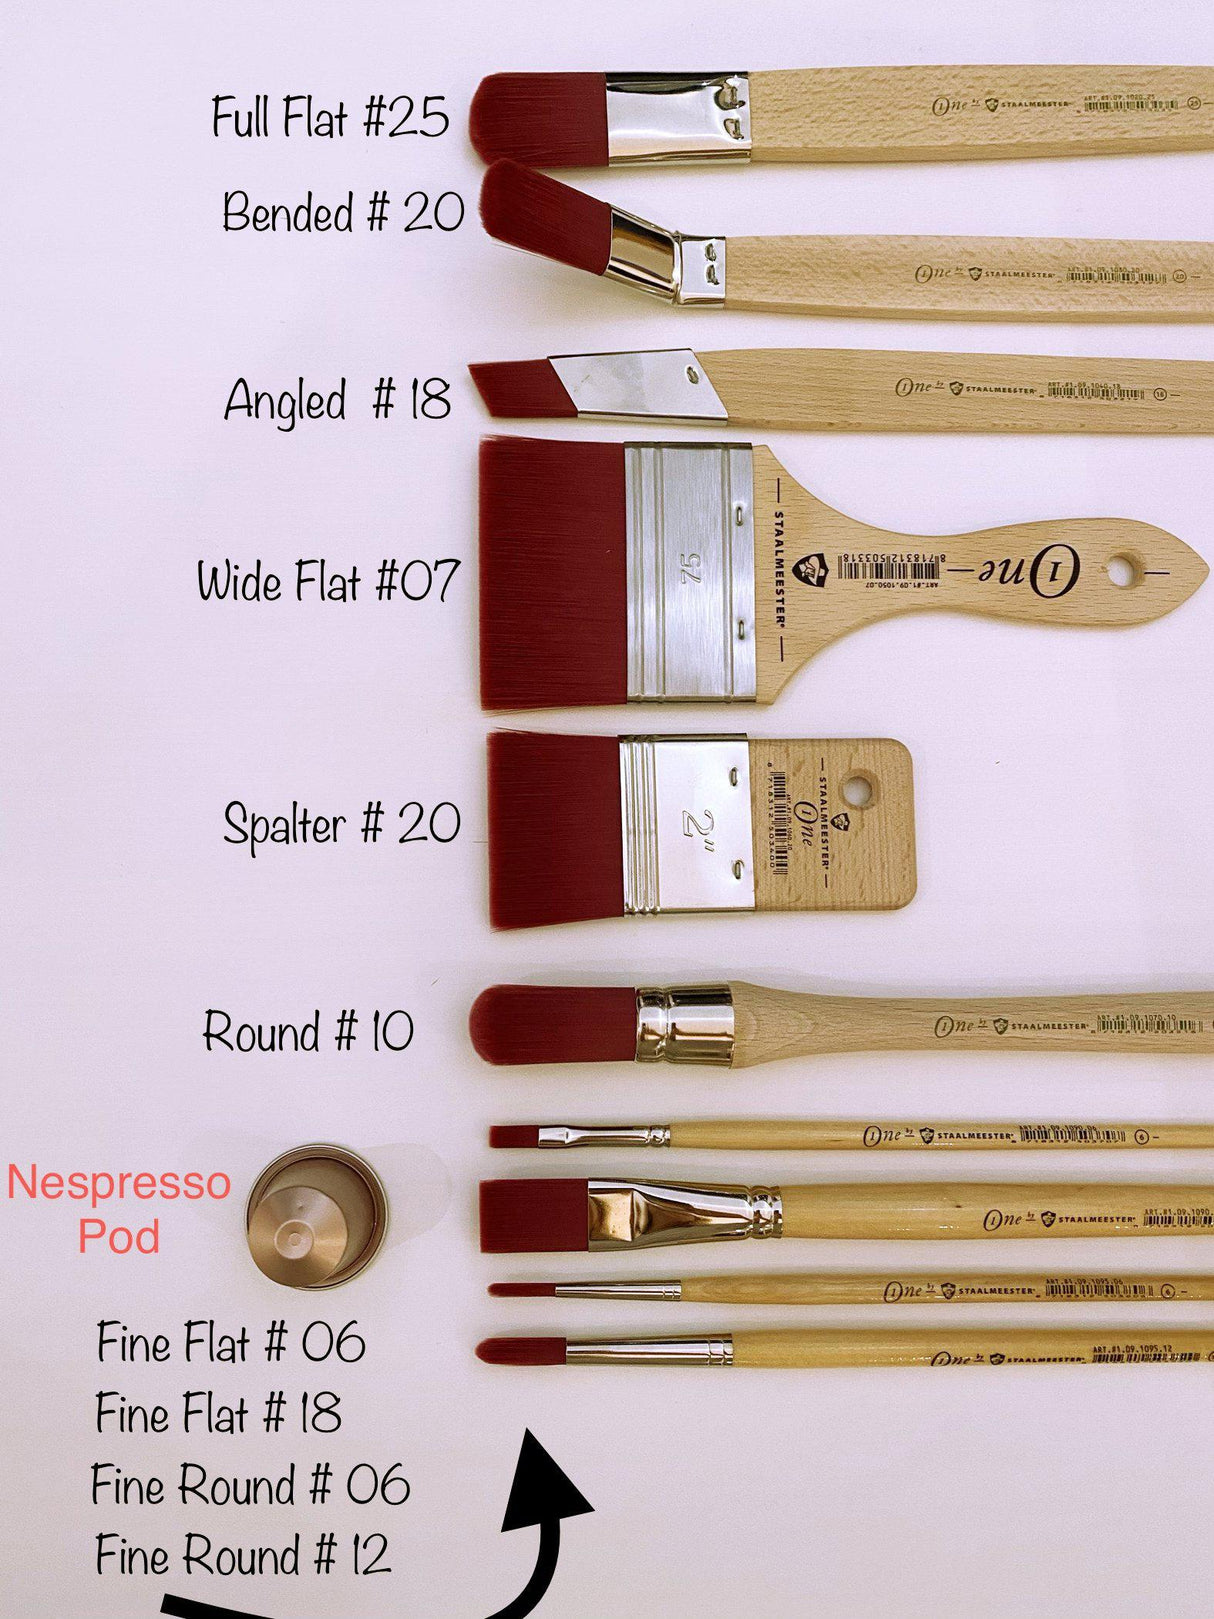 Angled Fitch Artist Paintbrush #18 (ONE Series 1040) by Staalmeester @ Painted Heirloom